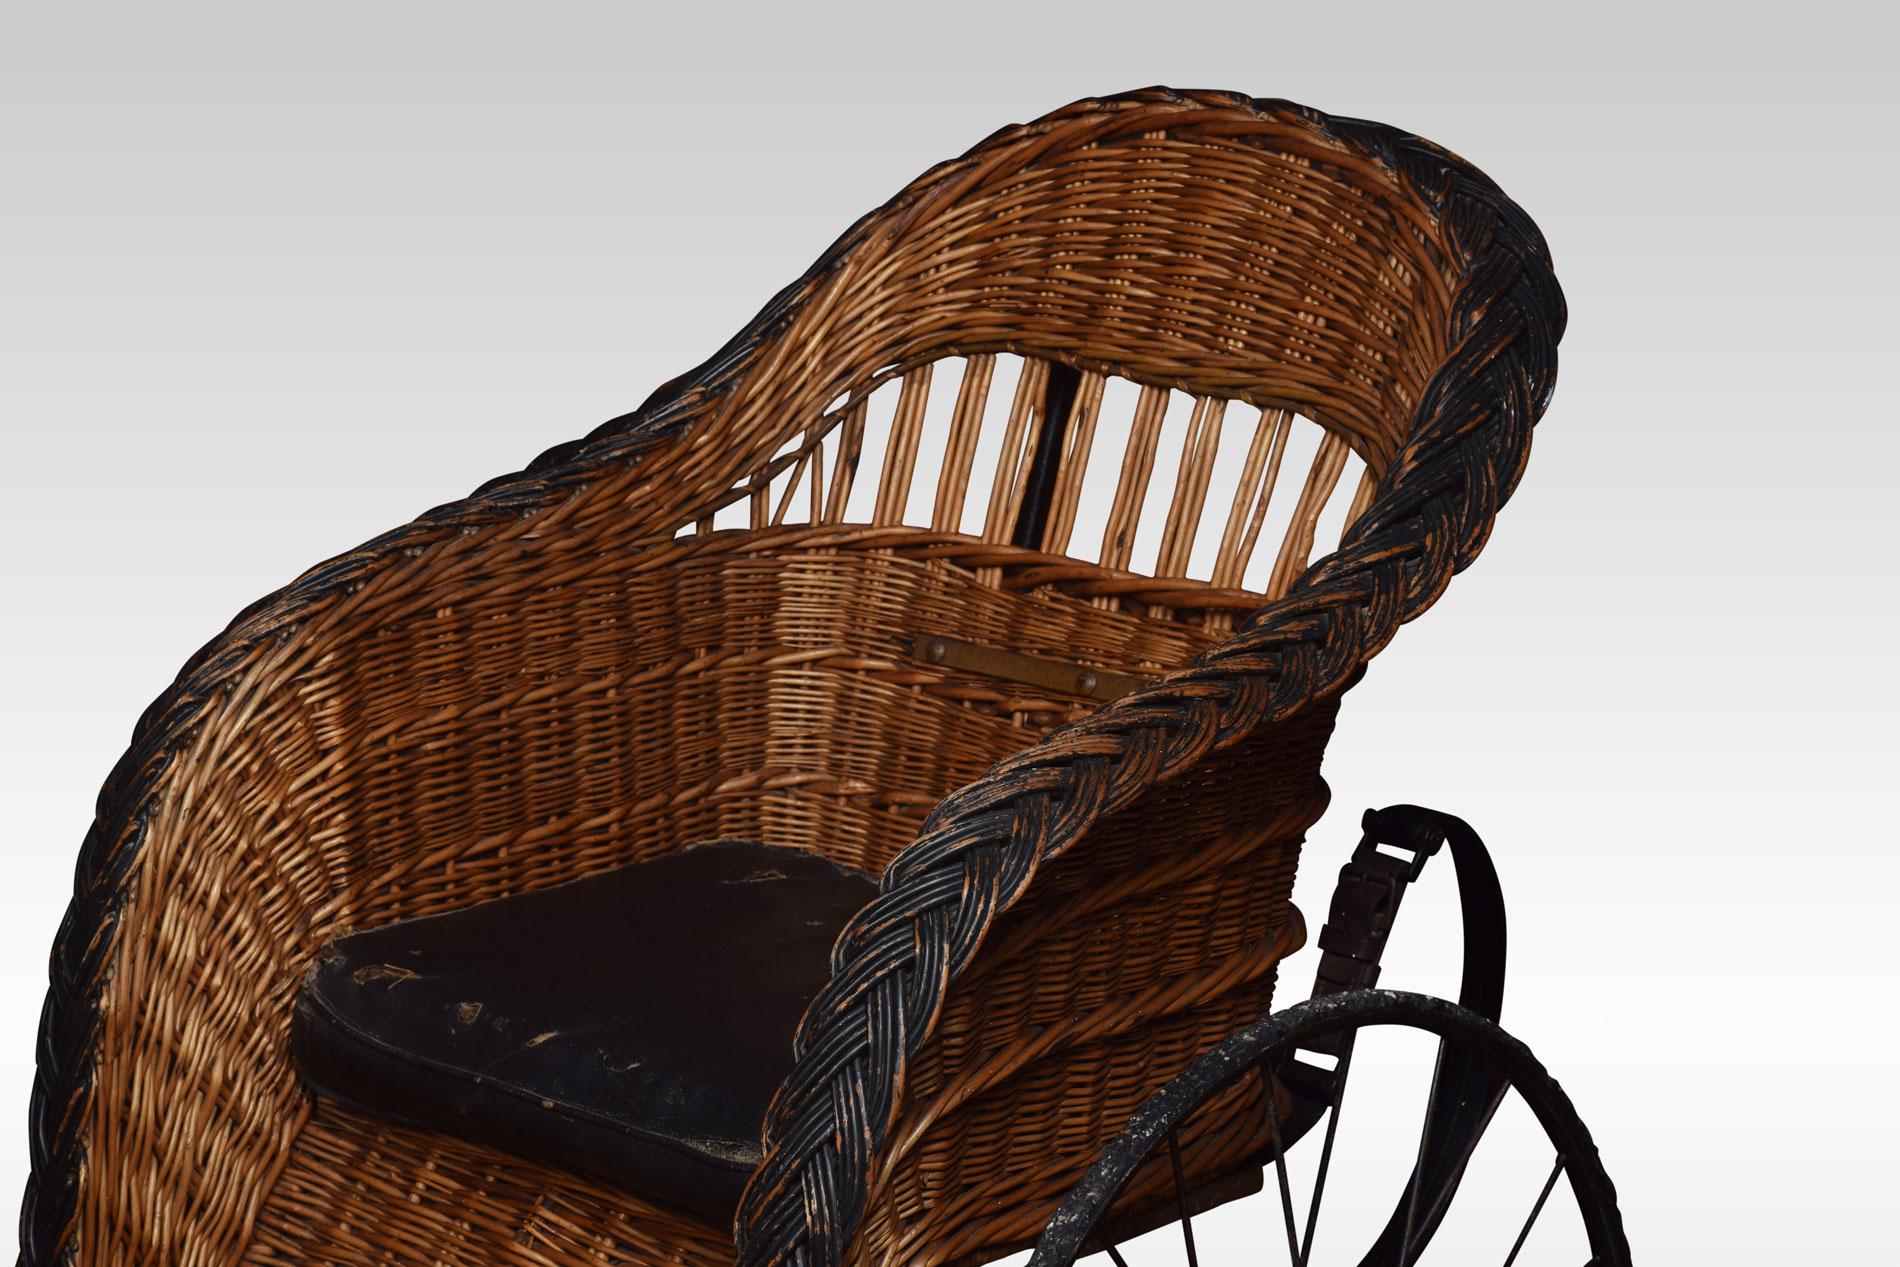 late-Victorian bath chair by John Ward London, with a wicker seat and spring carriage. All raised up on three wheels.

The bath chair is a forerunner to the modern wheelchair. It was invented by James Heath and gained popularity and its name when